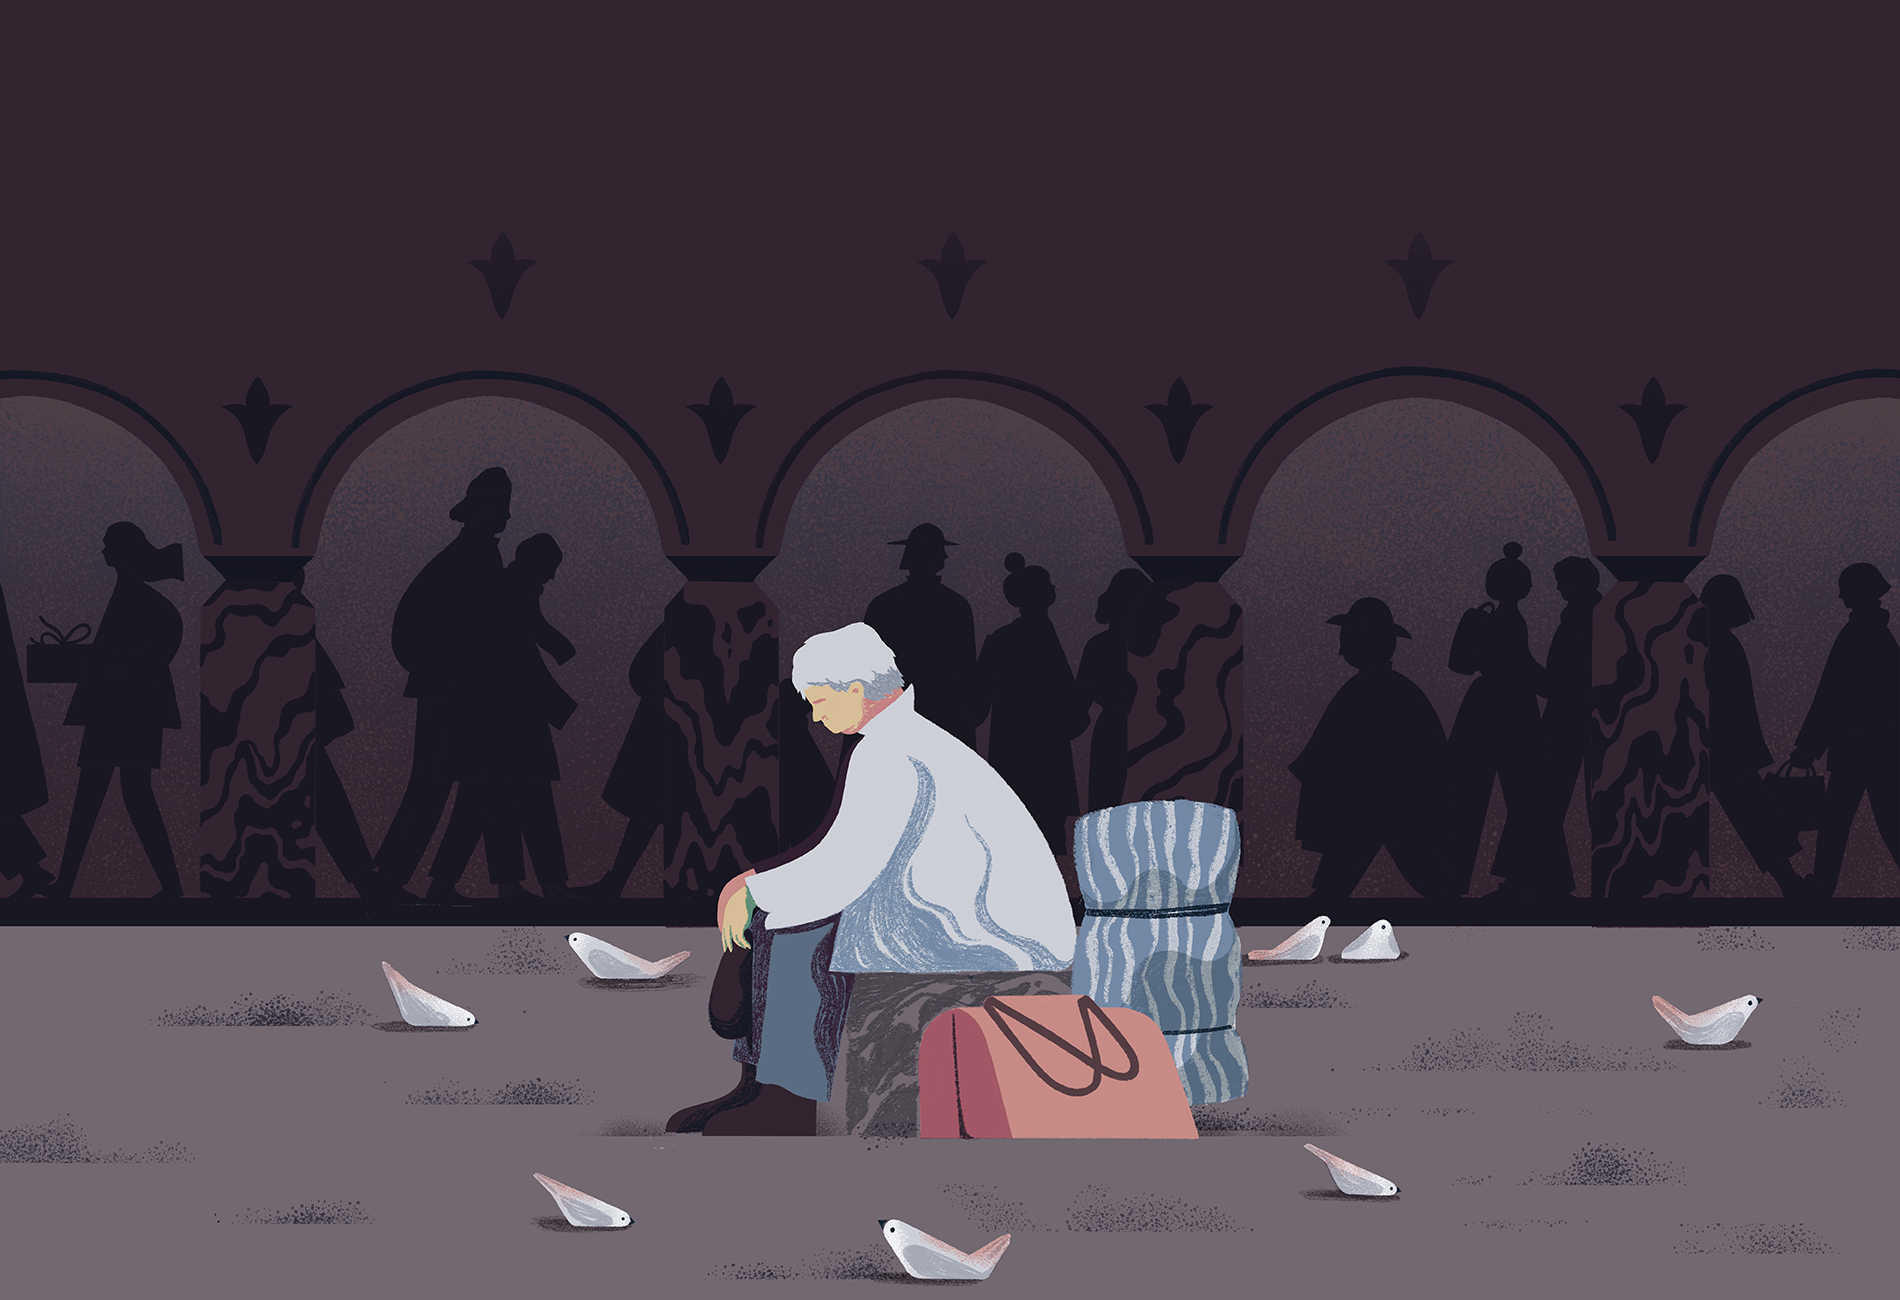 Illustration of a man sitting alone with two suitcases, surrounded by birds, while shadows of people walk in the background.